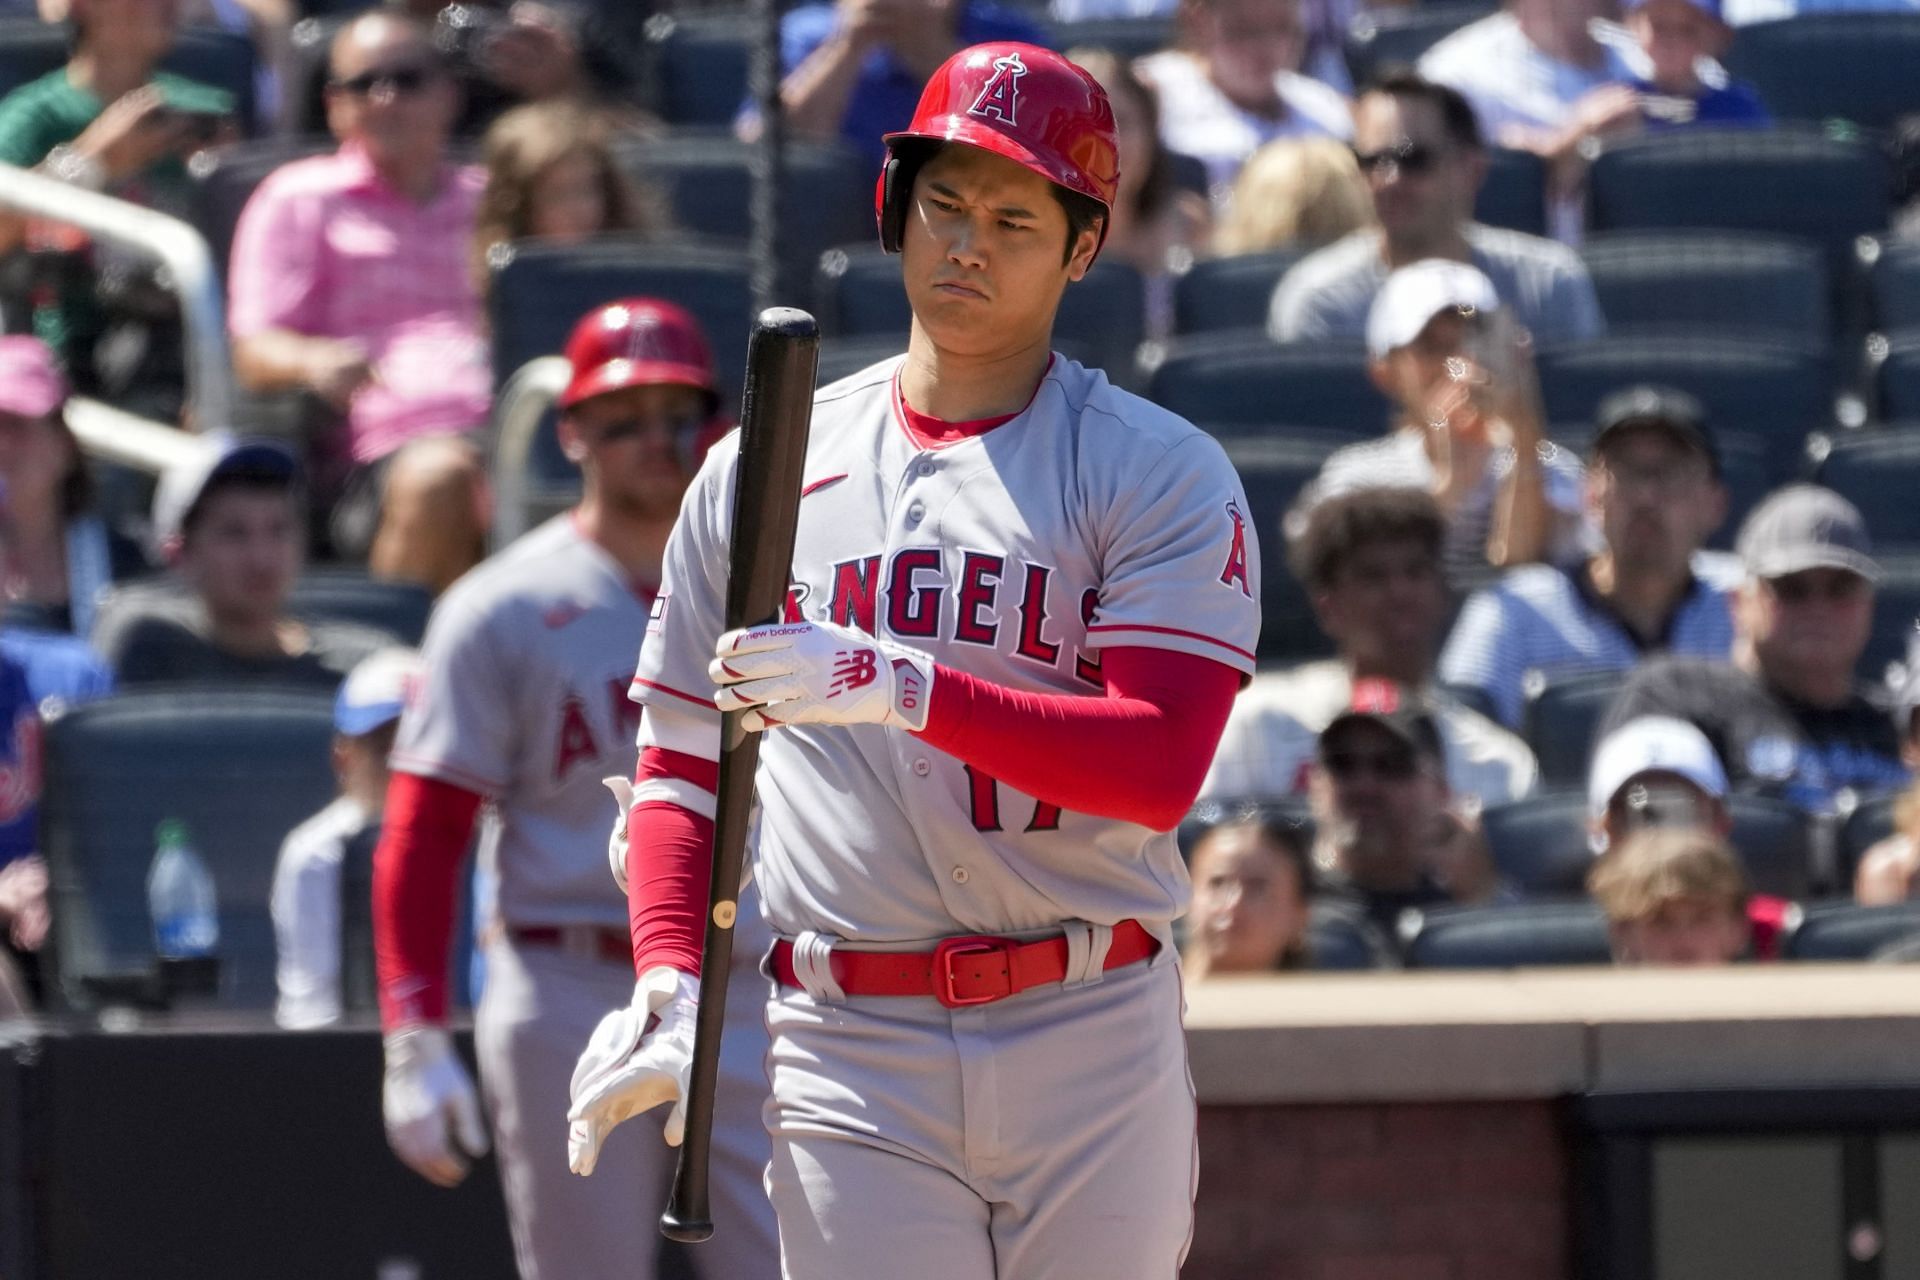 Shohei Ohtani might go to the Mets